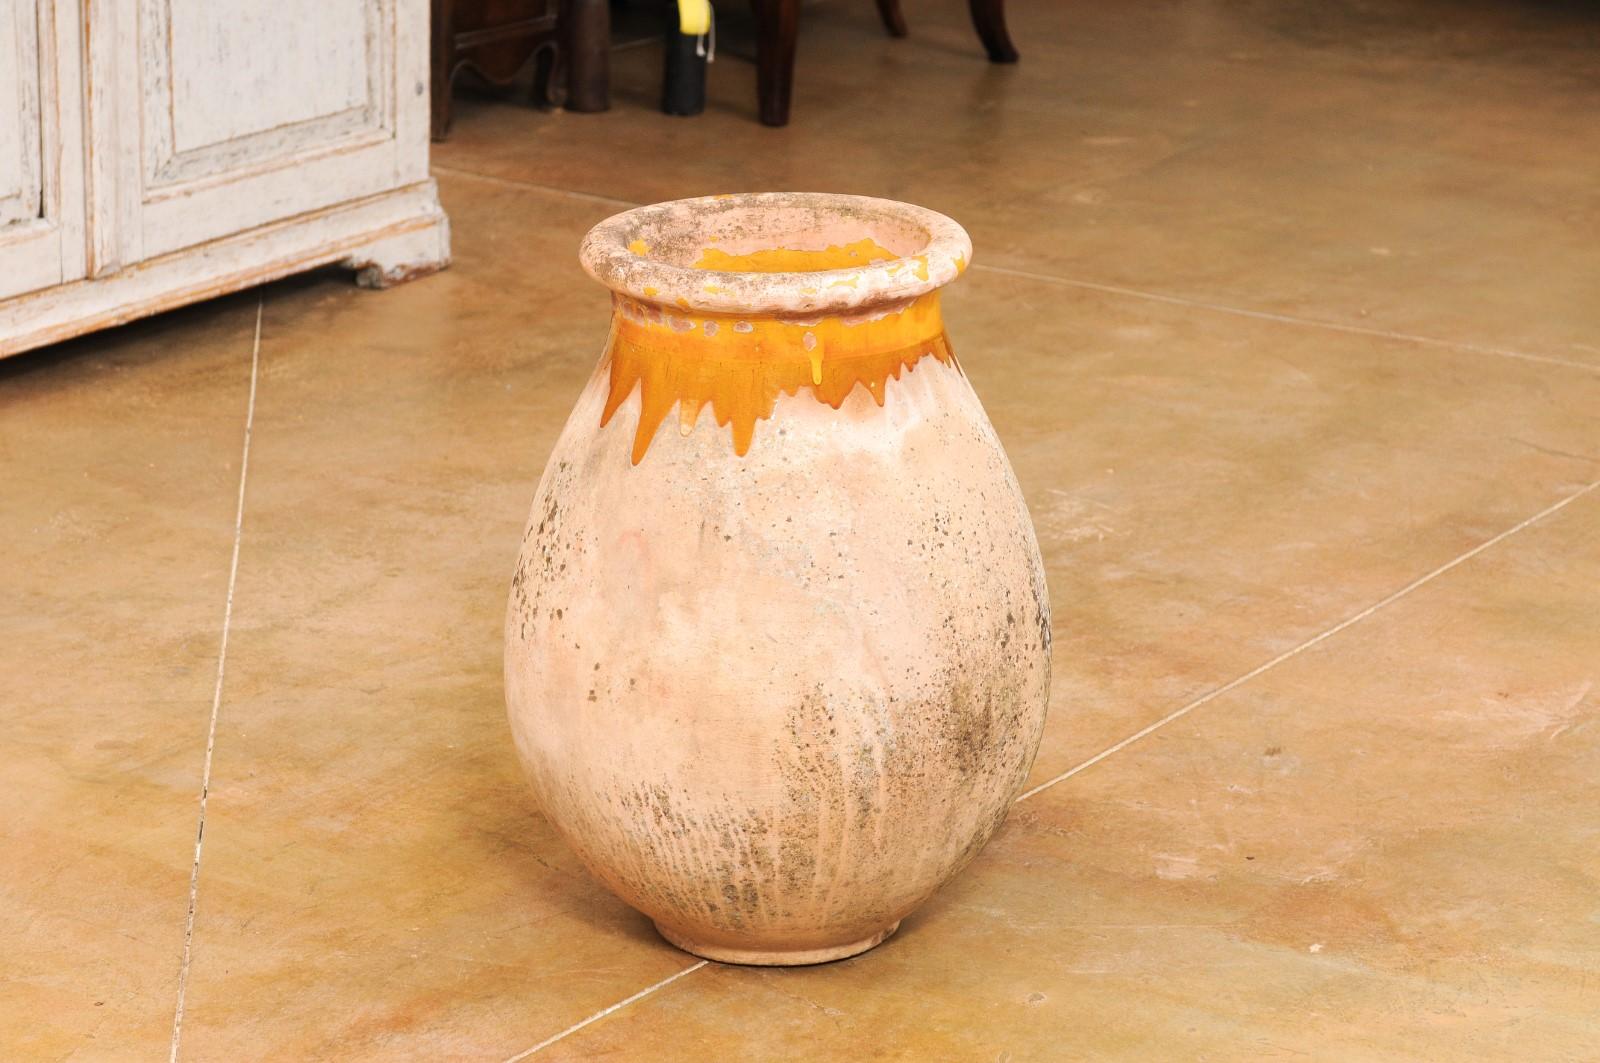 French Provincial French 19th Century Biot Pottery Jar with Yellow Glaze and Dripping Effect For Sale